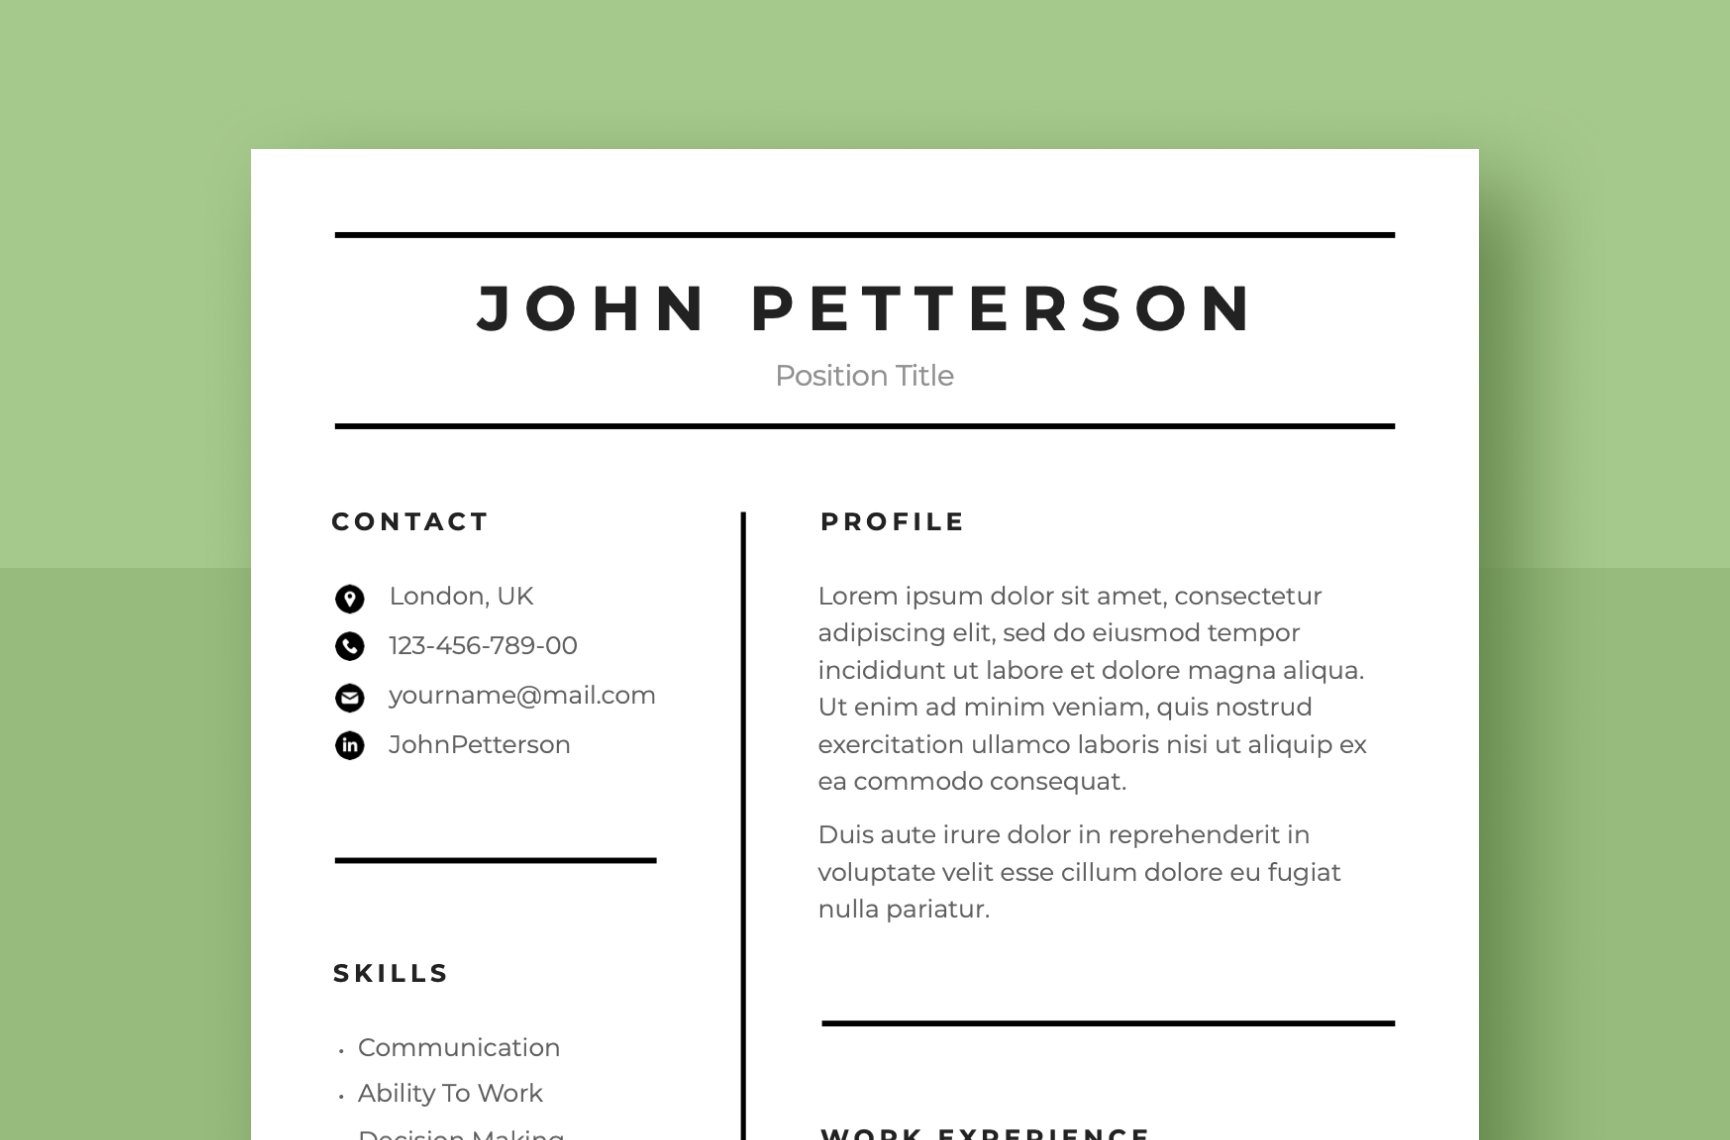 Professional Resume Template CV cover image.